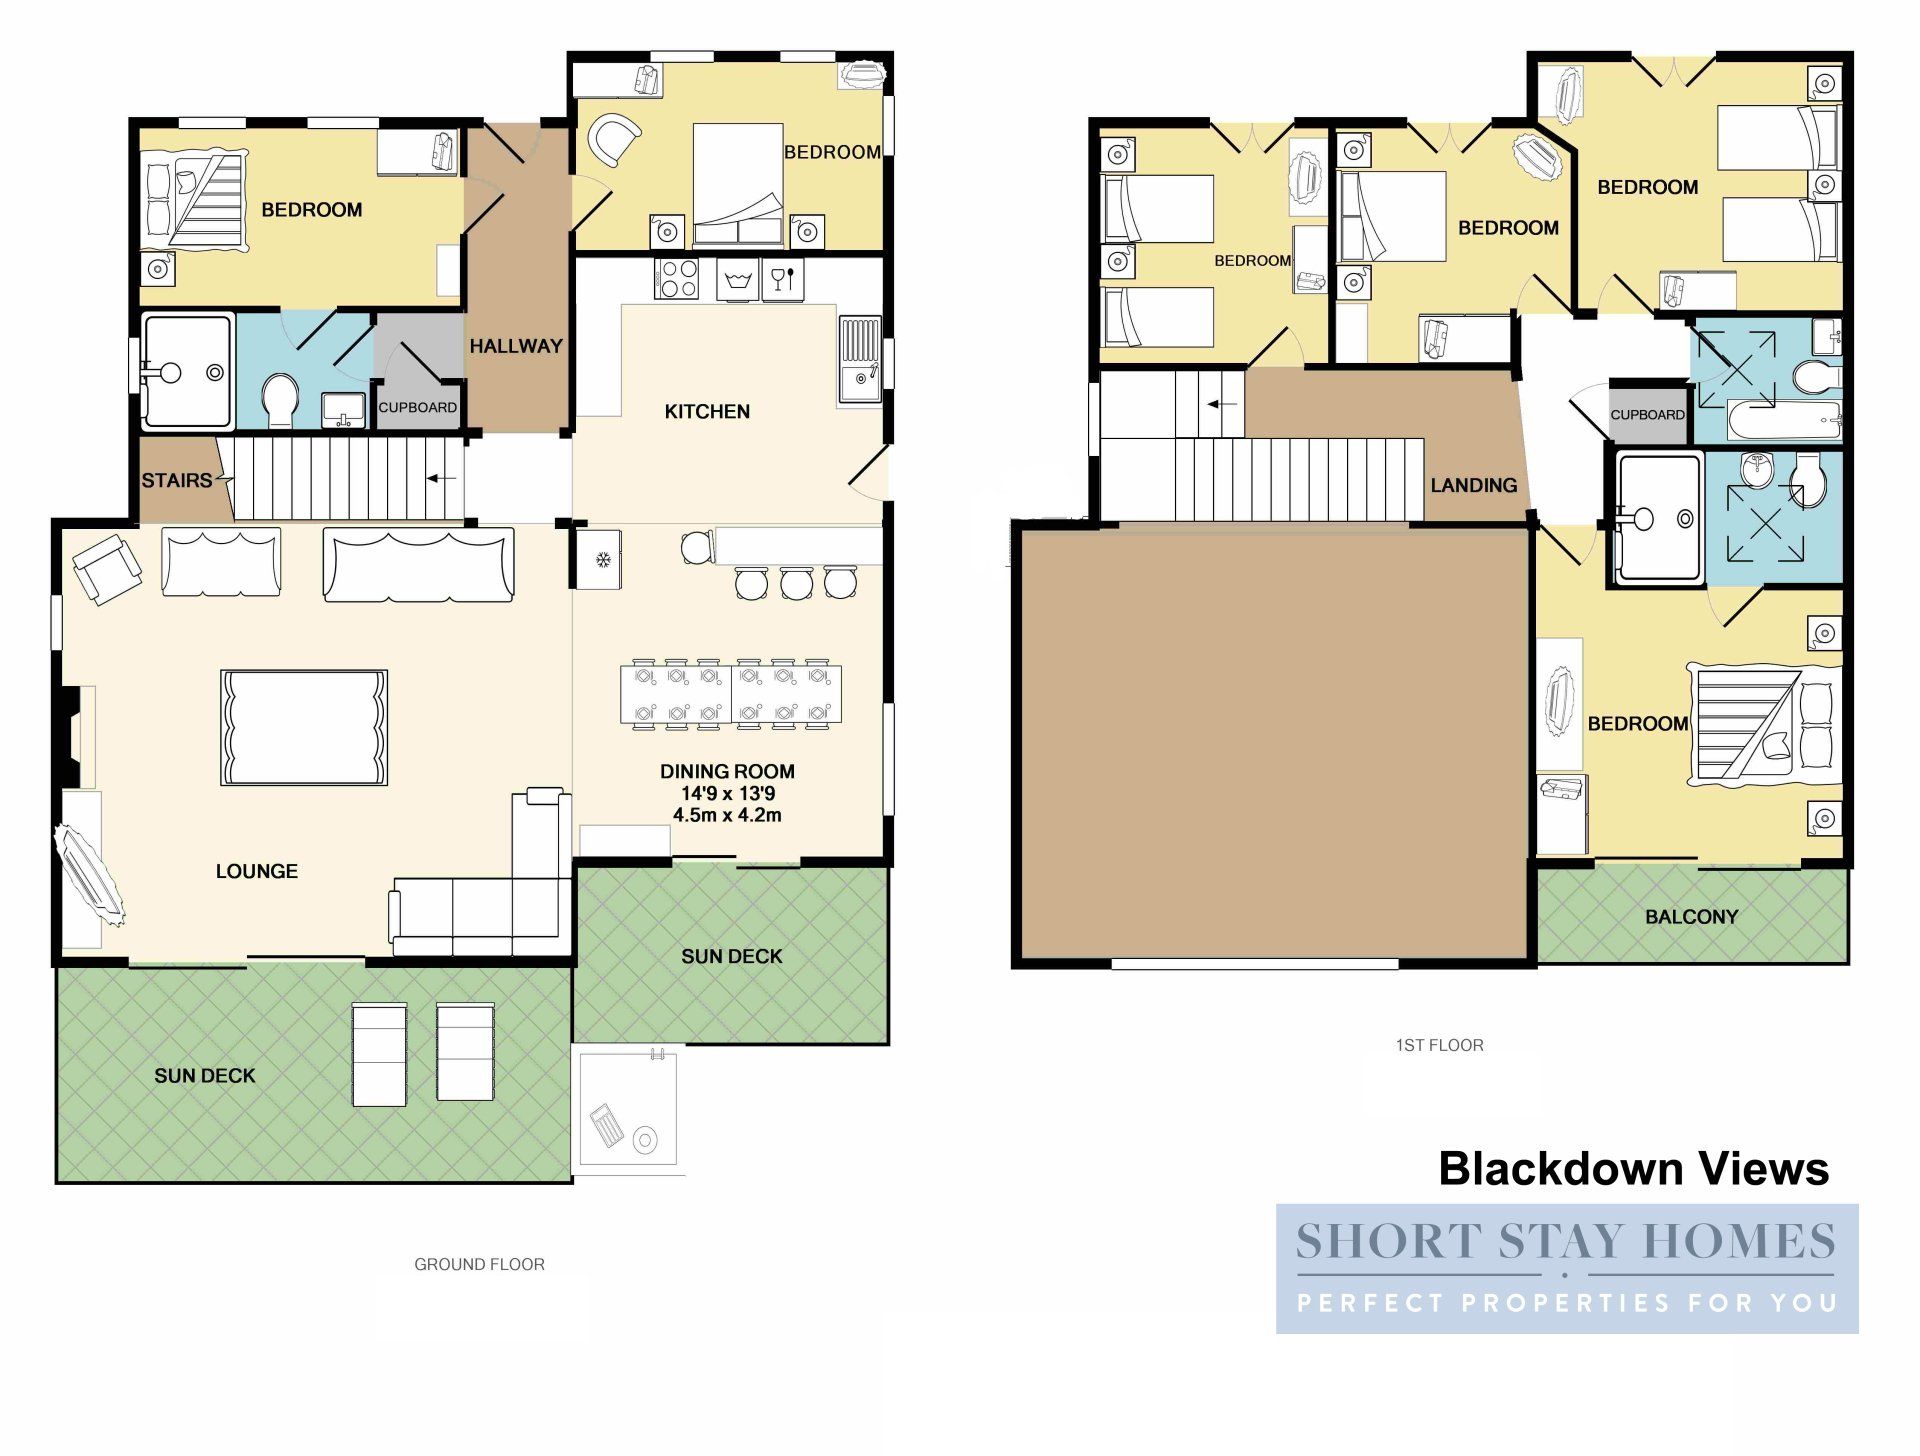 Proposed Floorplan, the sitting room is the full height of the building